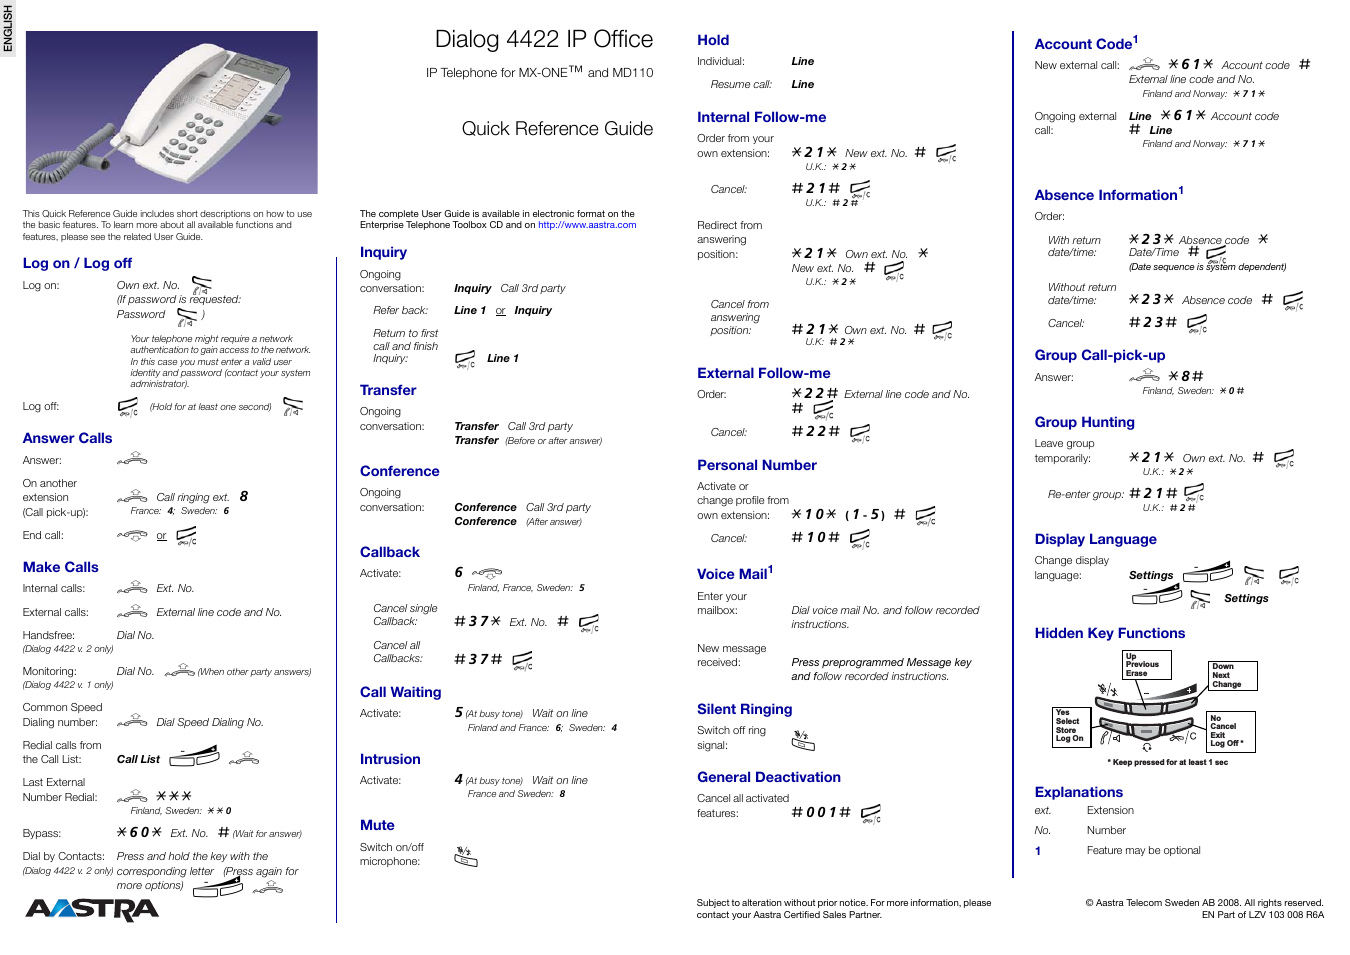 4422 IP Office for MX-ONE Quick Reference Guide